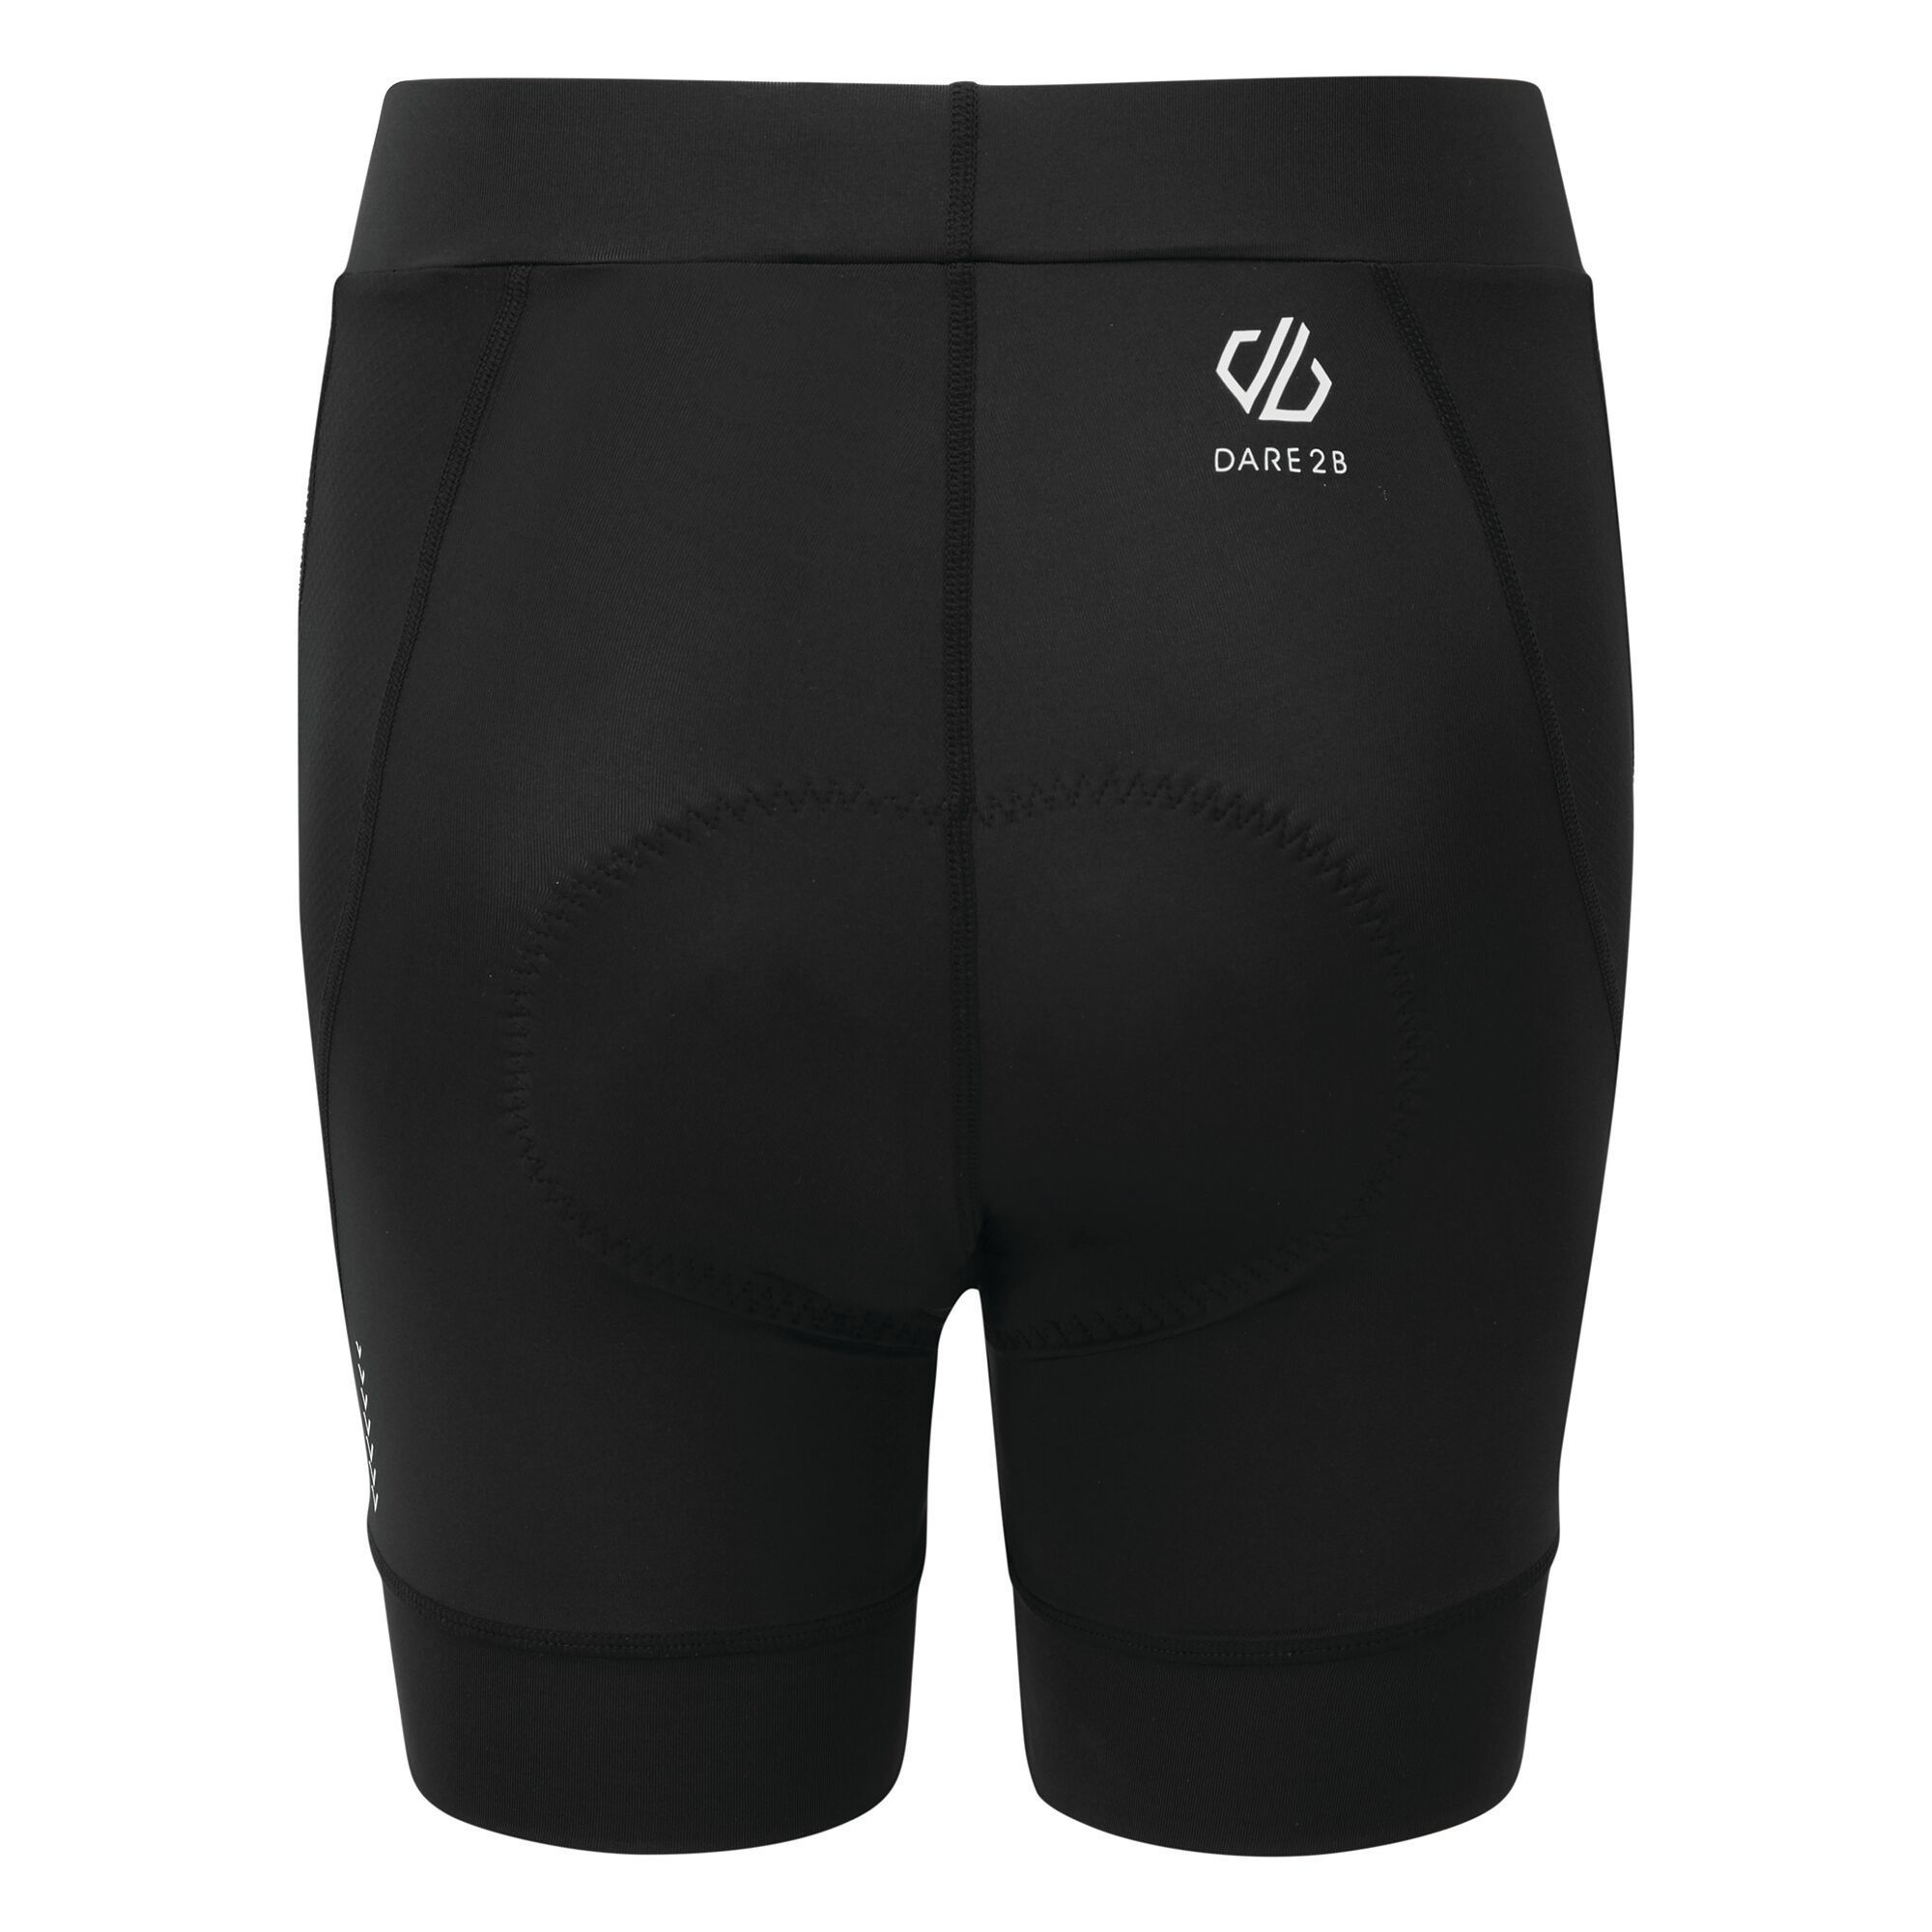 Materials: 88% polyamide, 12% elastane. Advanced ergonomic performance (AEP). Q-Wic lightweight nylon / elastane fabric. Good wicking performance. Quick drying. Flat locked seams for comfort. AEP pro II 3D stretch multi density foam insert. Coolmax moisture control and anti-bacterial treatment to insert. Anatomically designed insert with oxy flow ventilation. Reflective print detail.